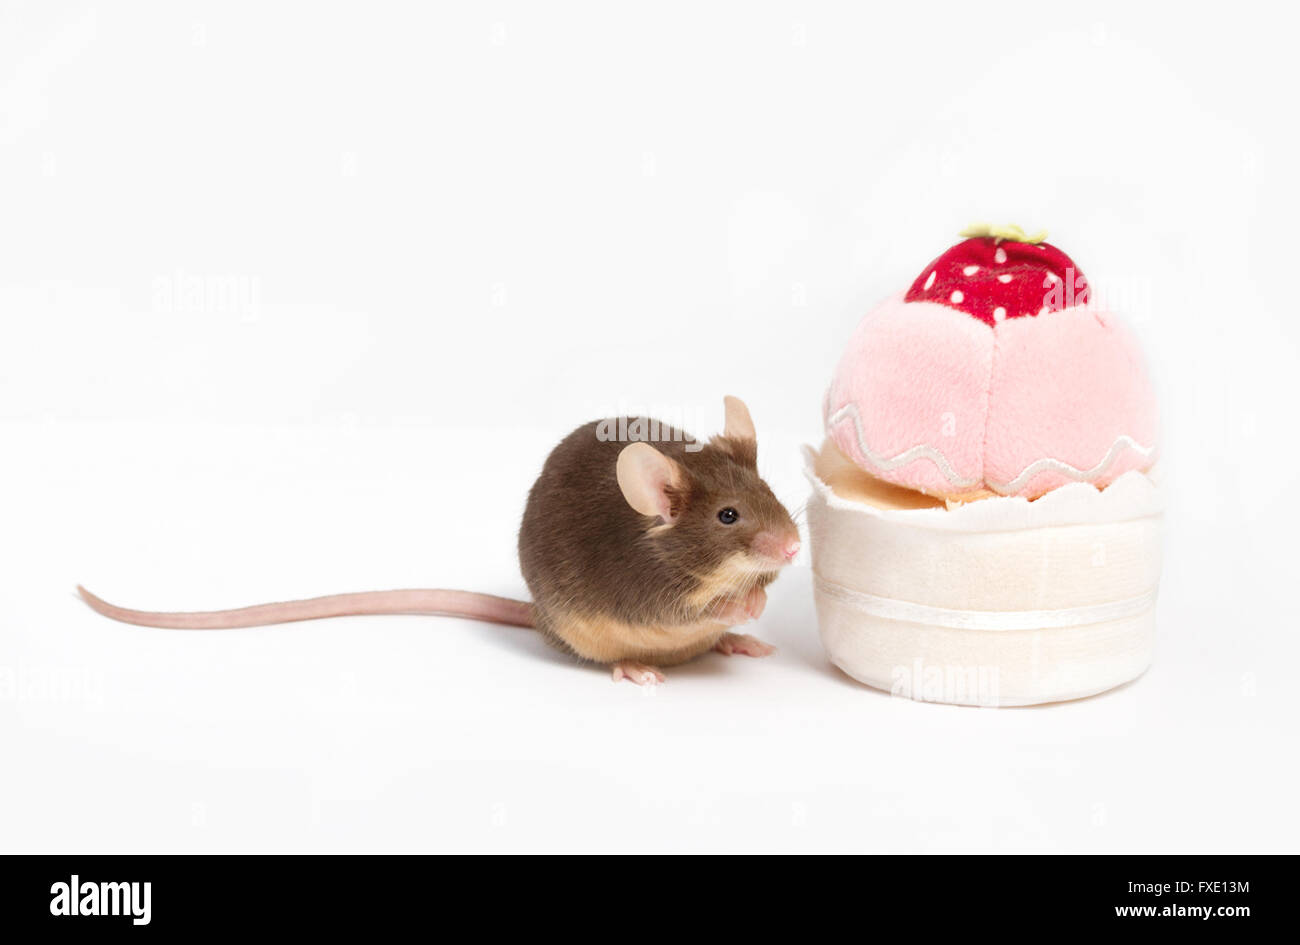 Curious domestic mouse explores plush cupcake. The mouse has bushing wiskers, long tail and cute little pink paws. Stock Photo